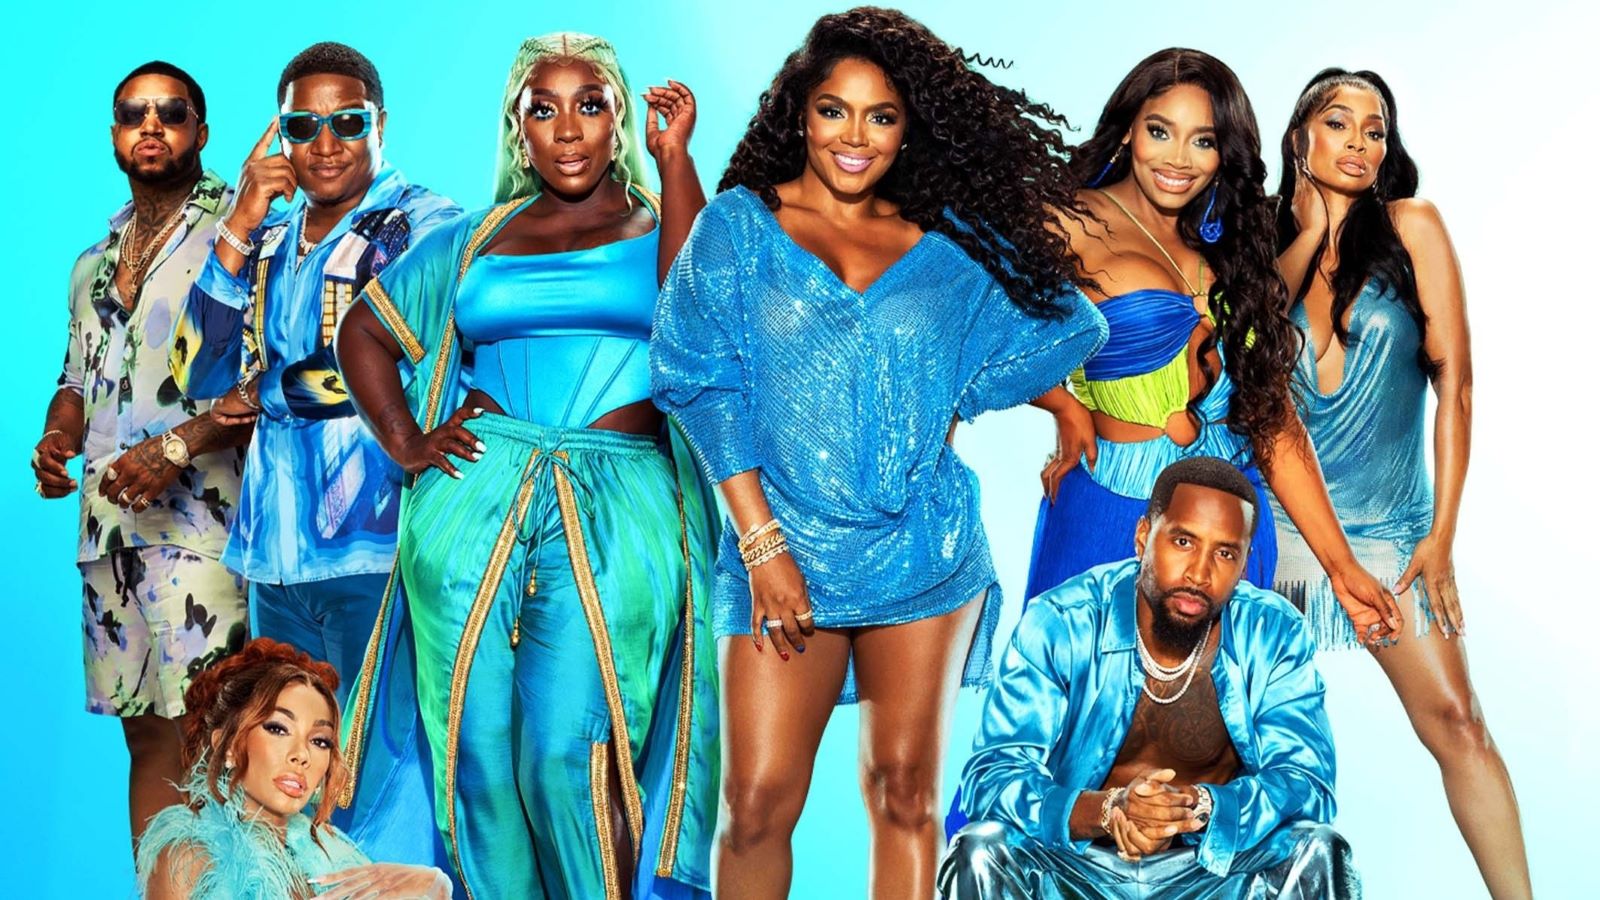 How to Watch Love & Hip Hop Atlanta Season 11 Online from Anywhere